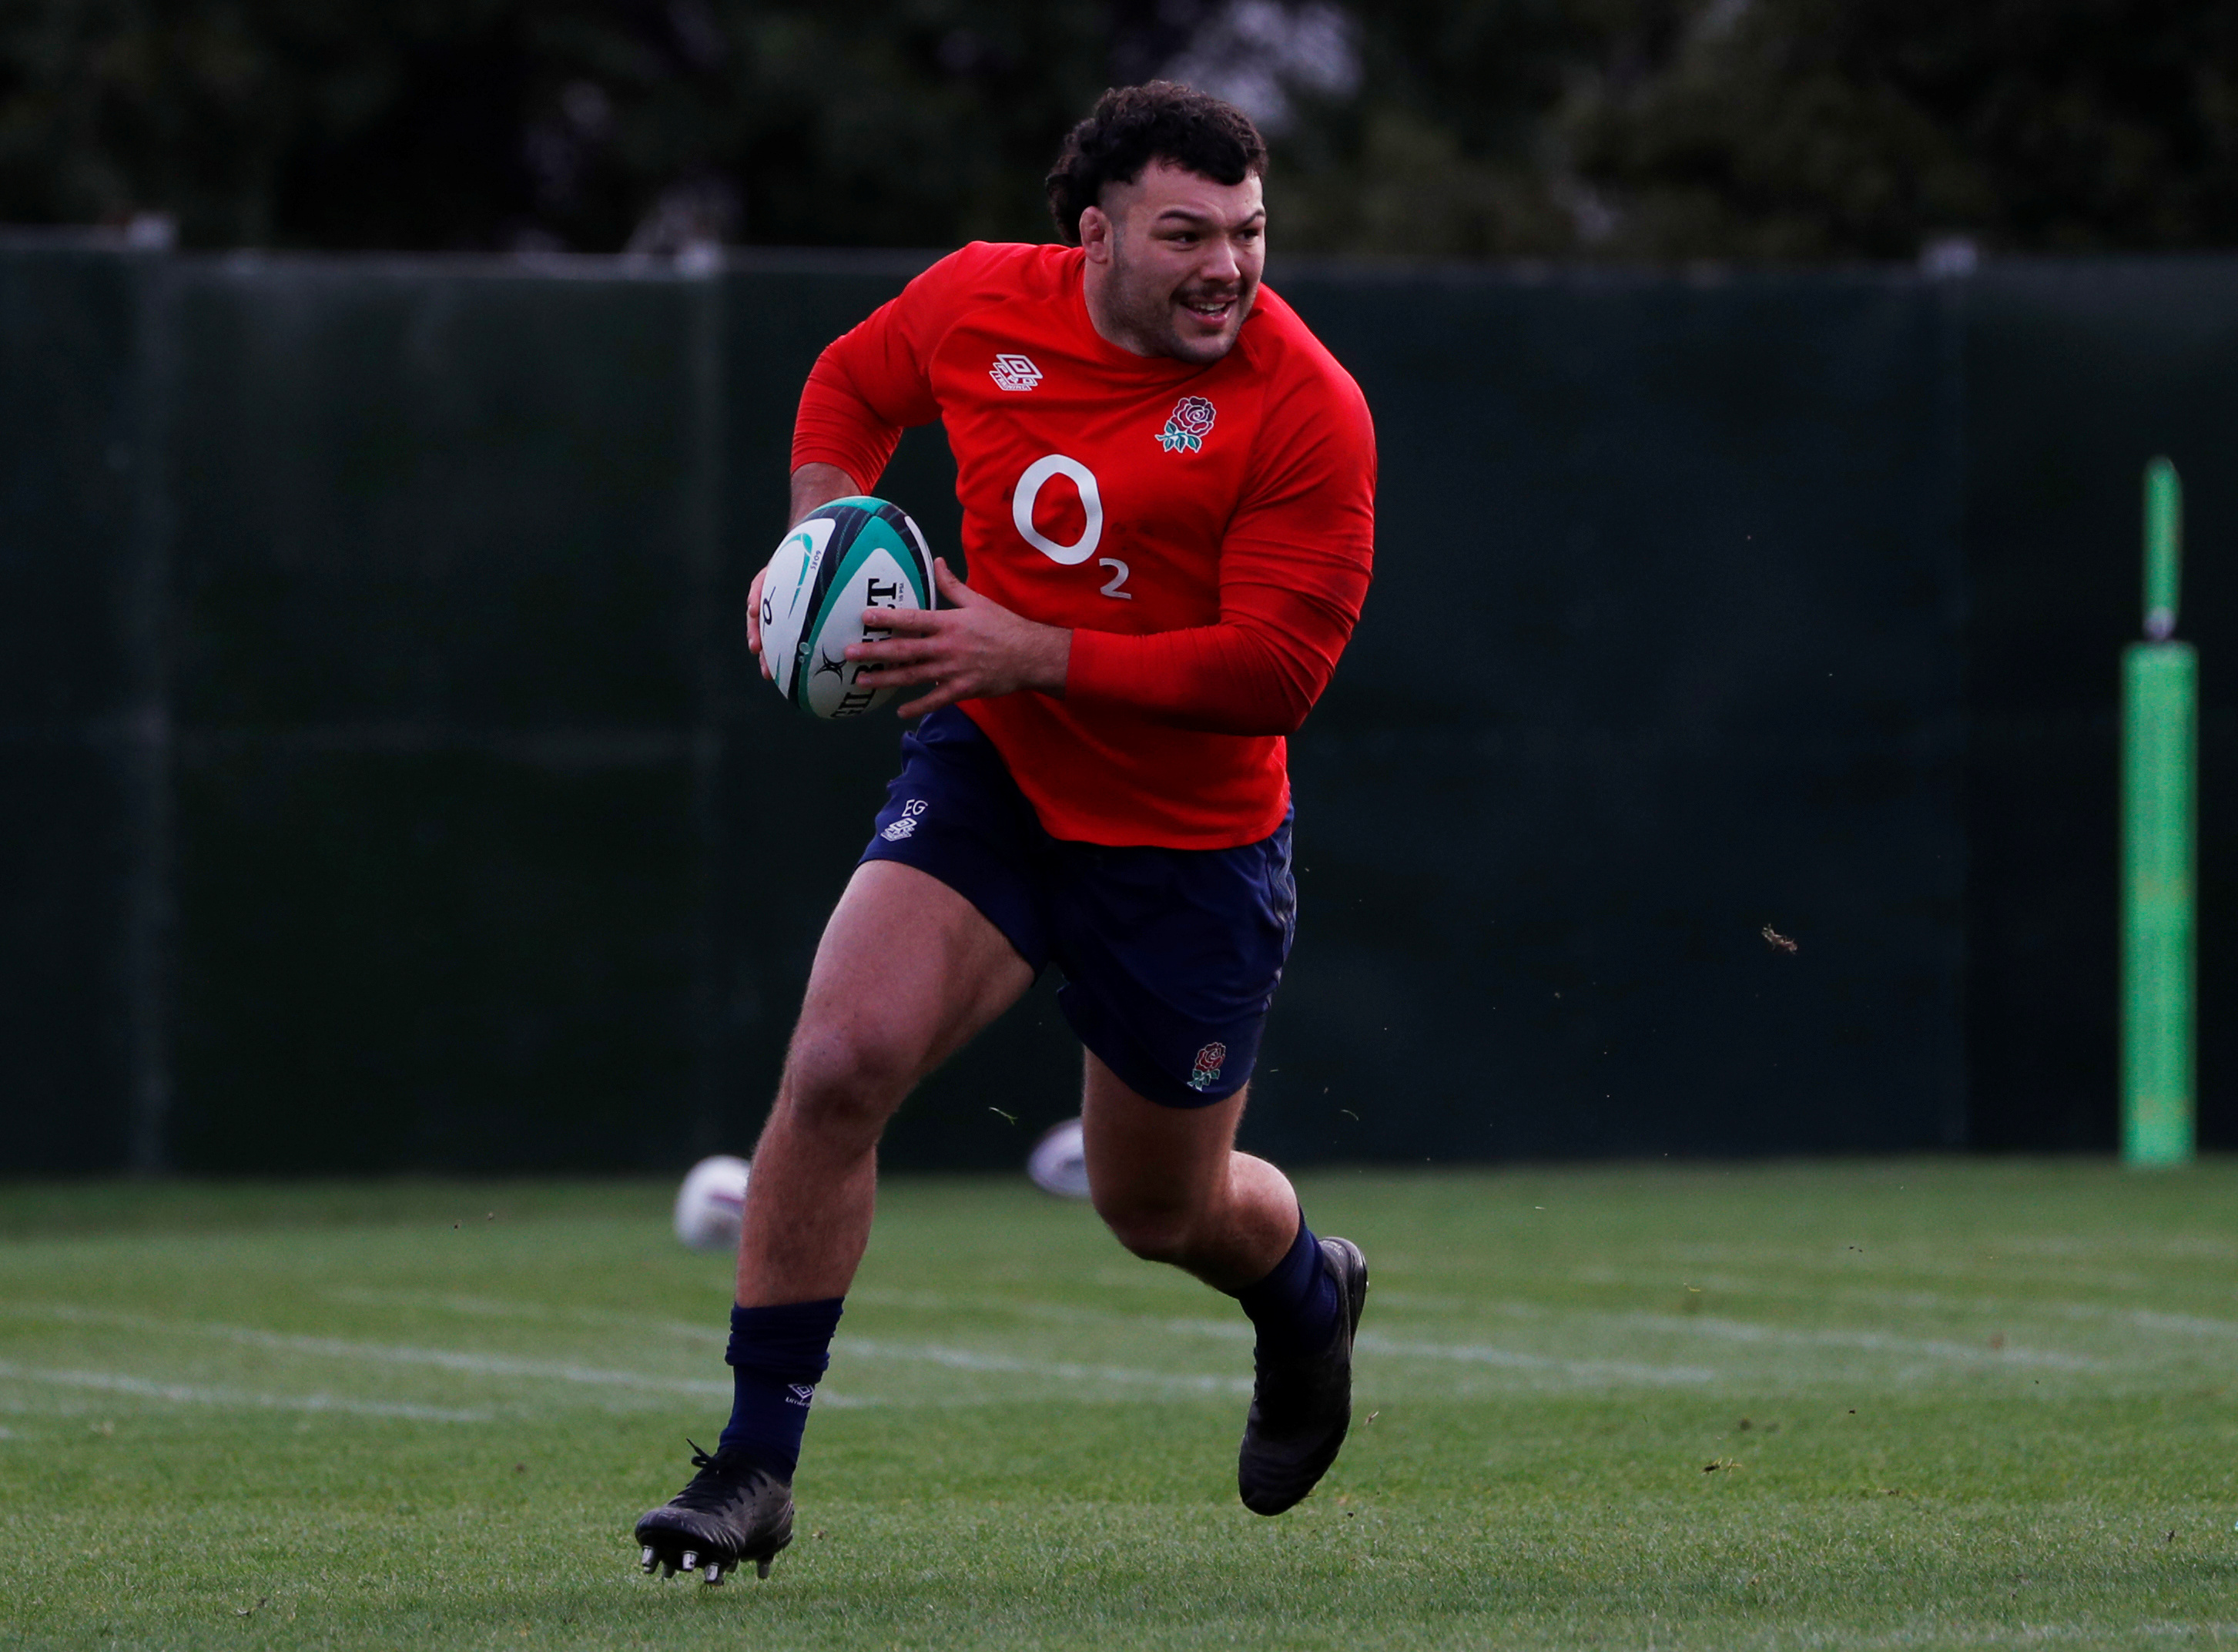 Rugby-England condemn online abuse of players after Genge receives death threats Reuters